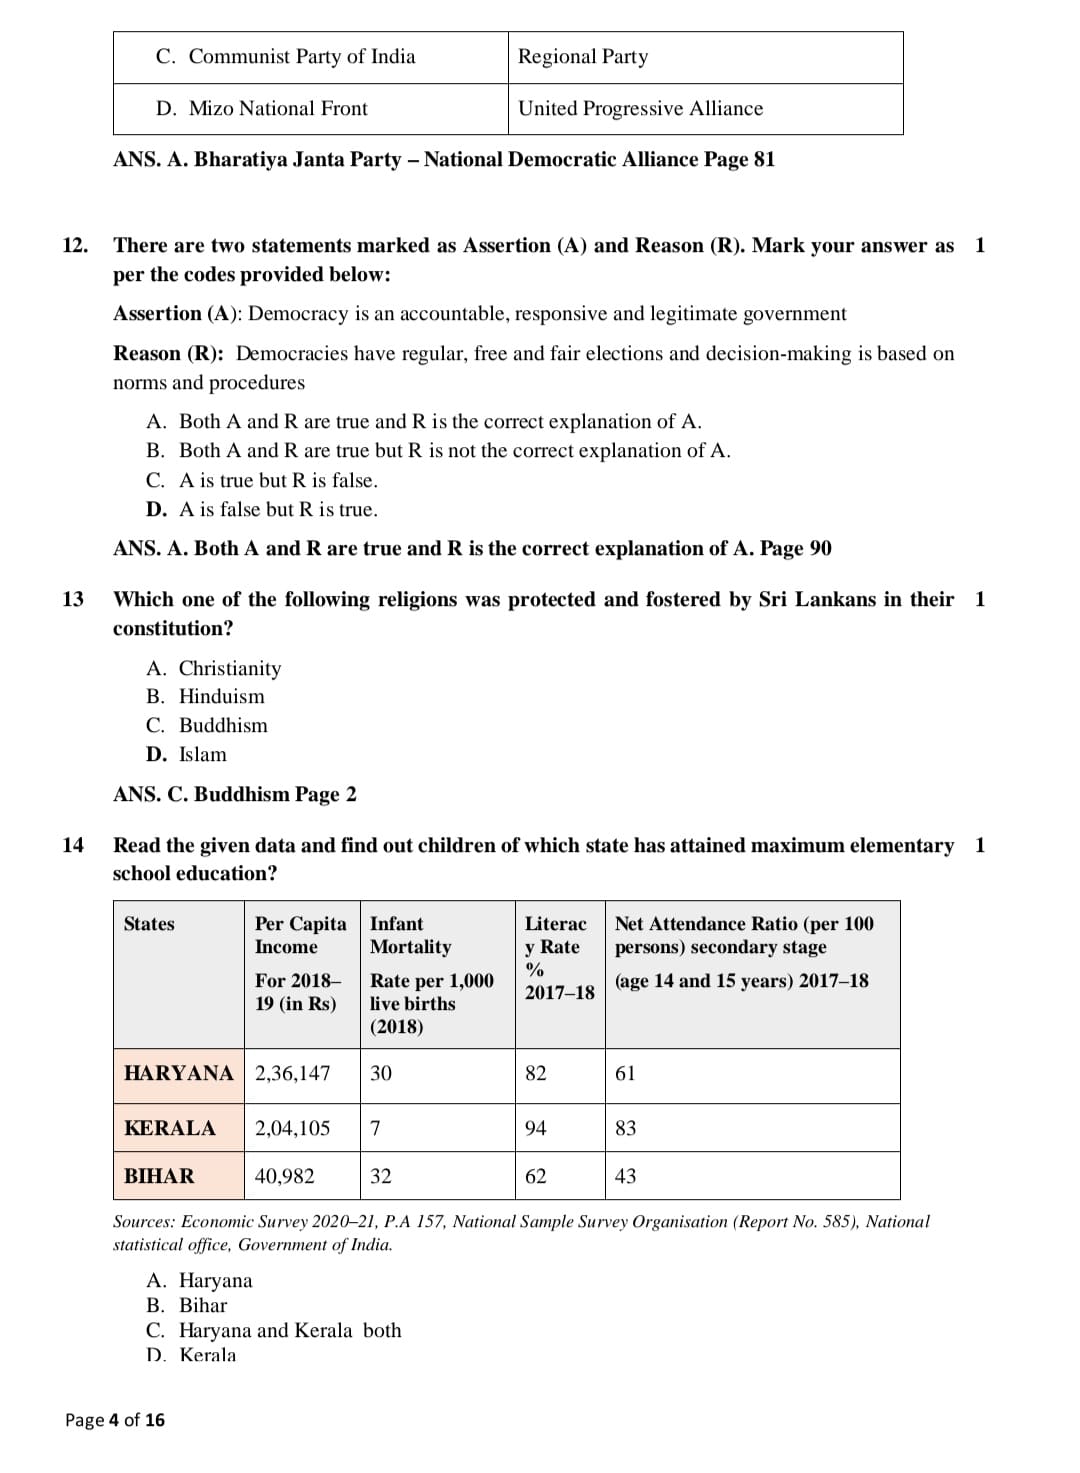 cbse class 10 social science official sample question paper4